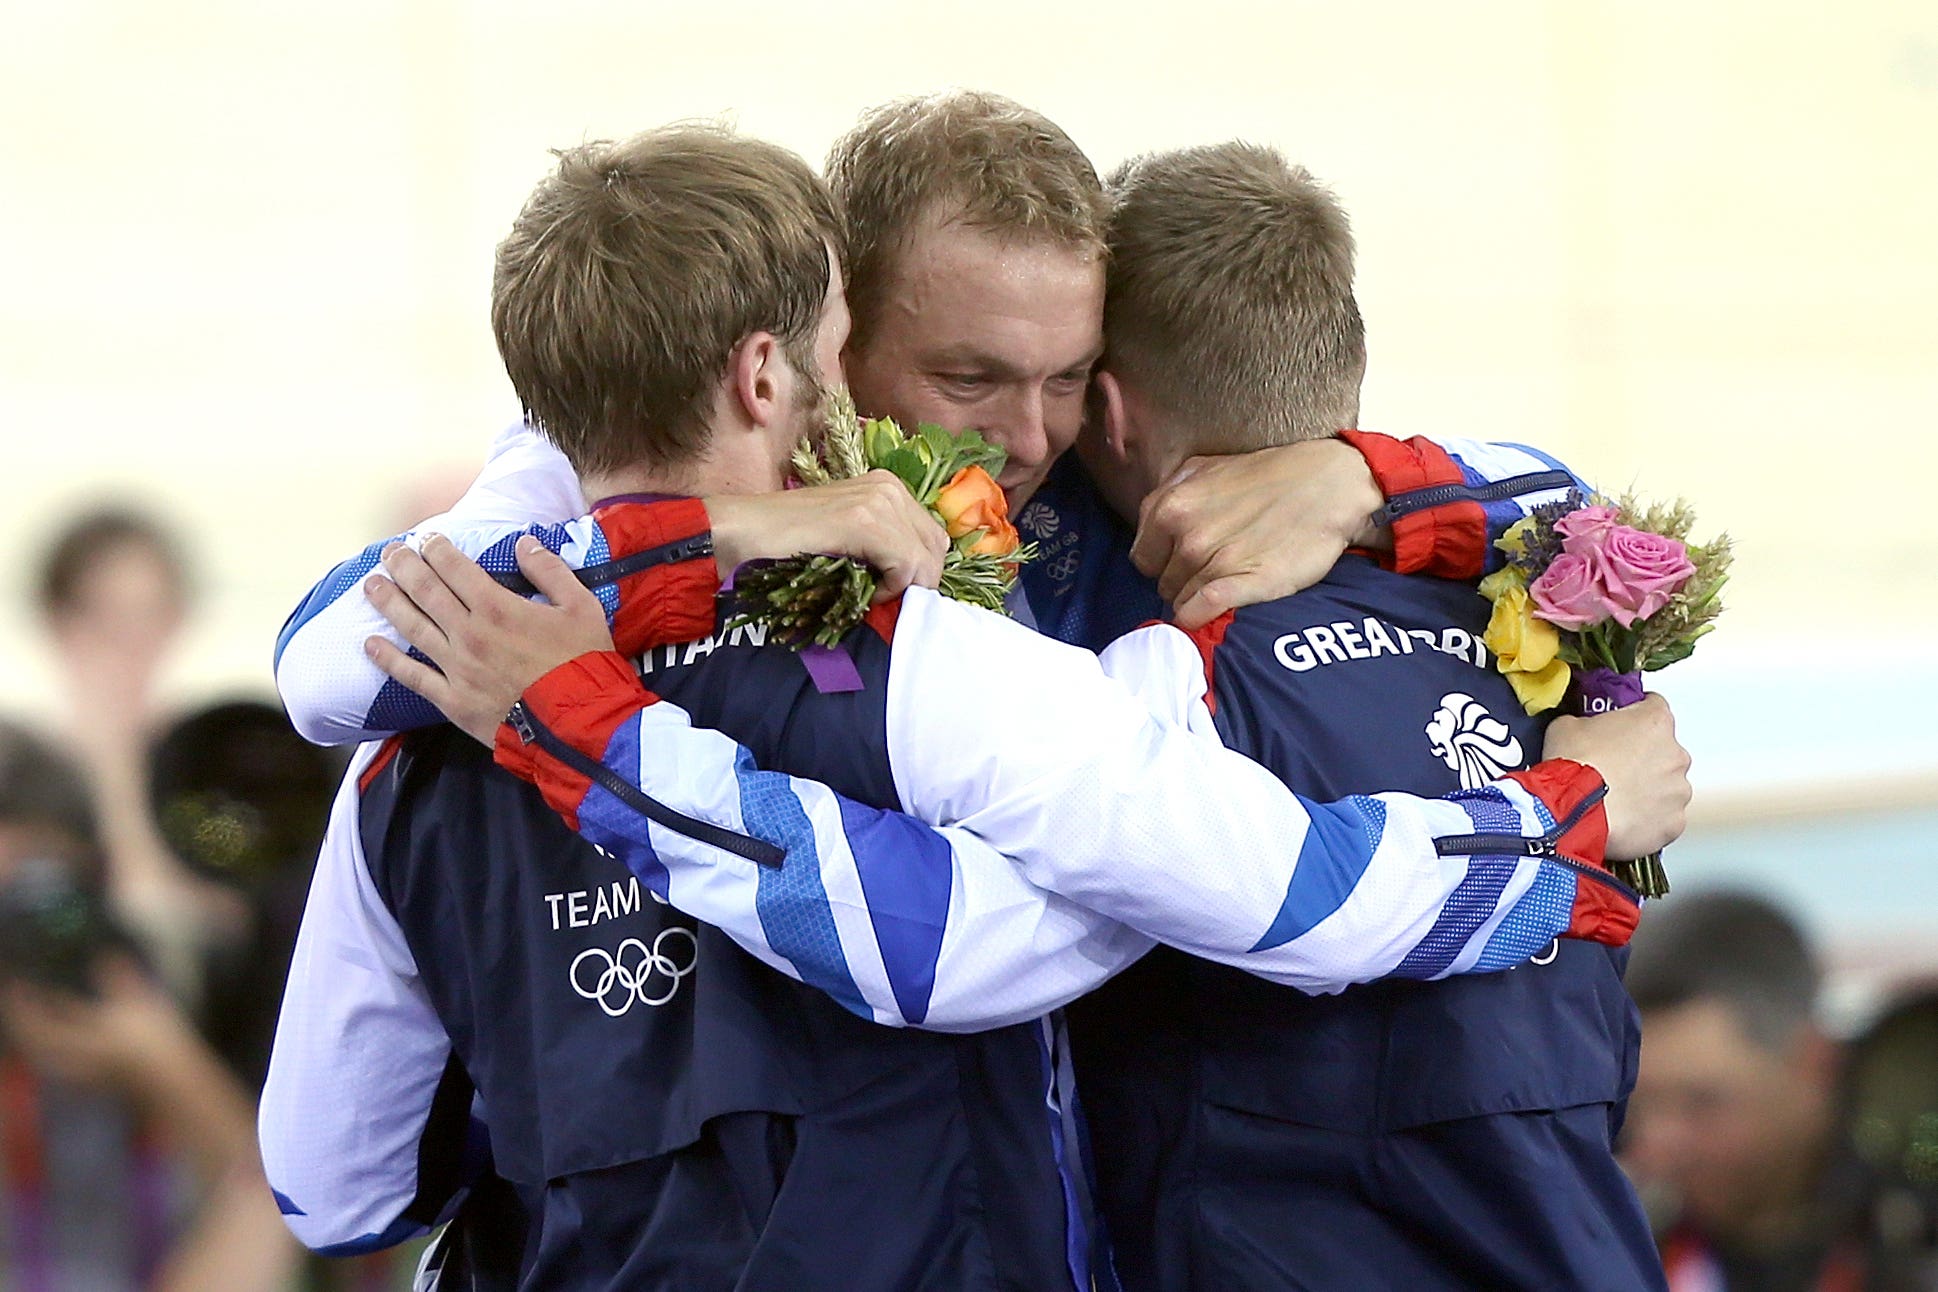 Great Britain’s Olympic teams have exceeded expectation since London 2012